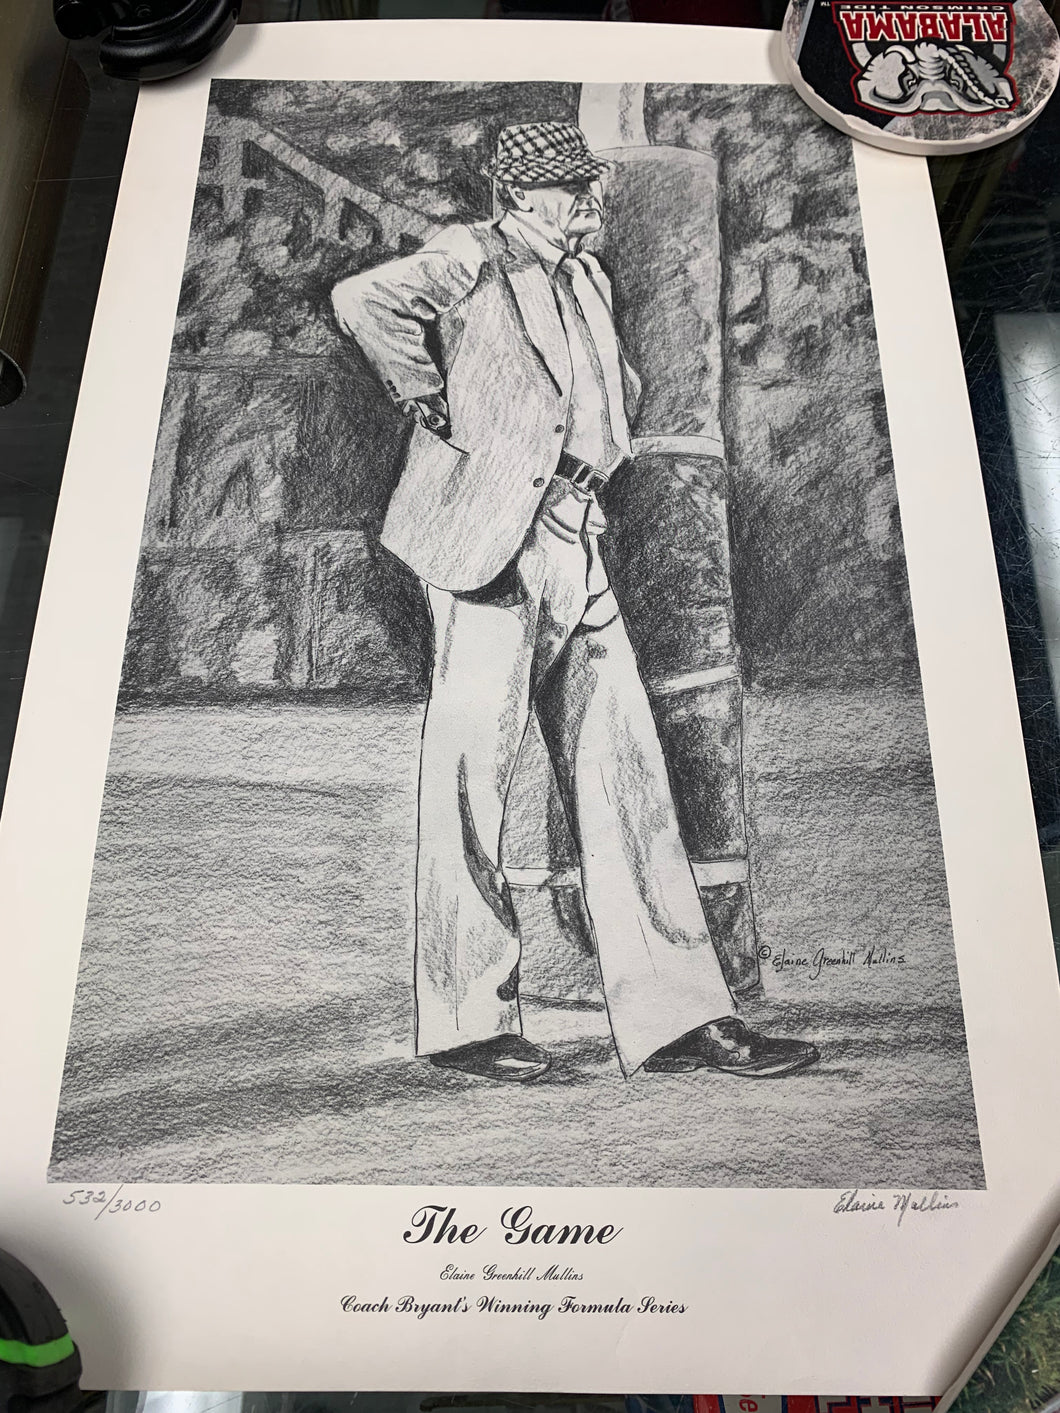 Bear Bryant “The Game” Collectible Print